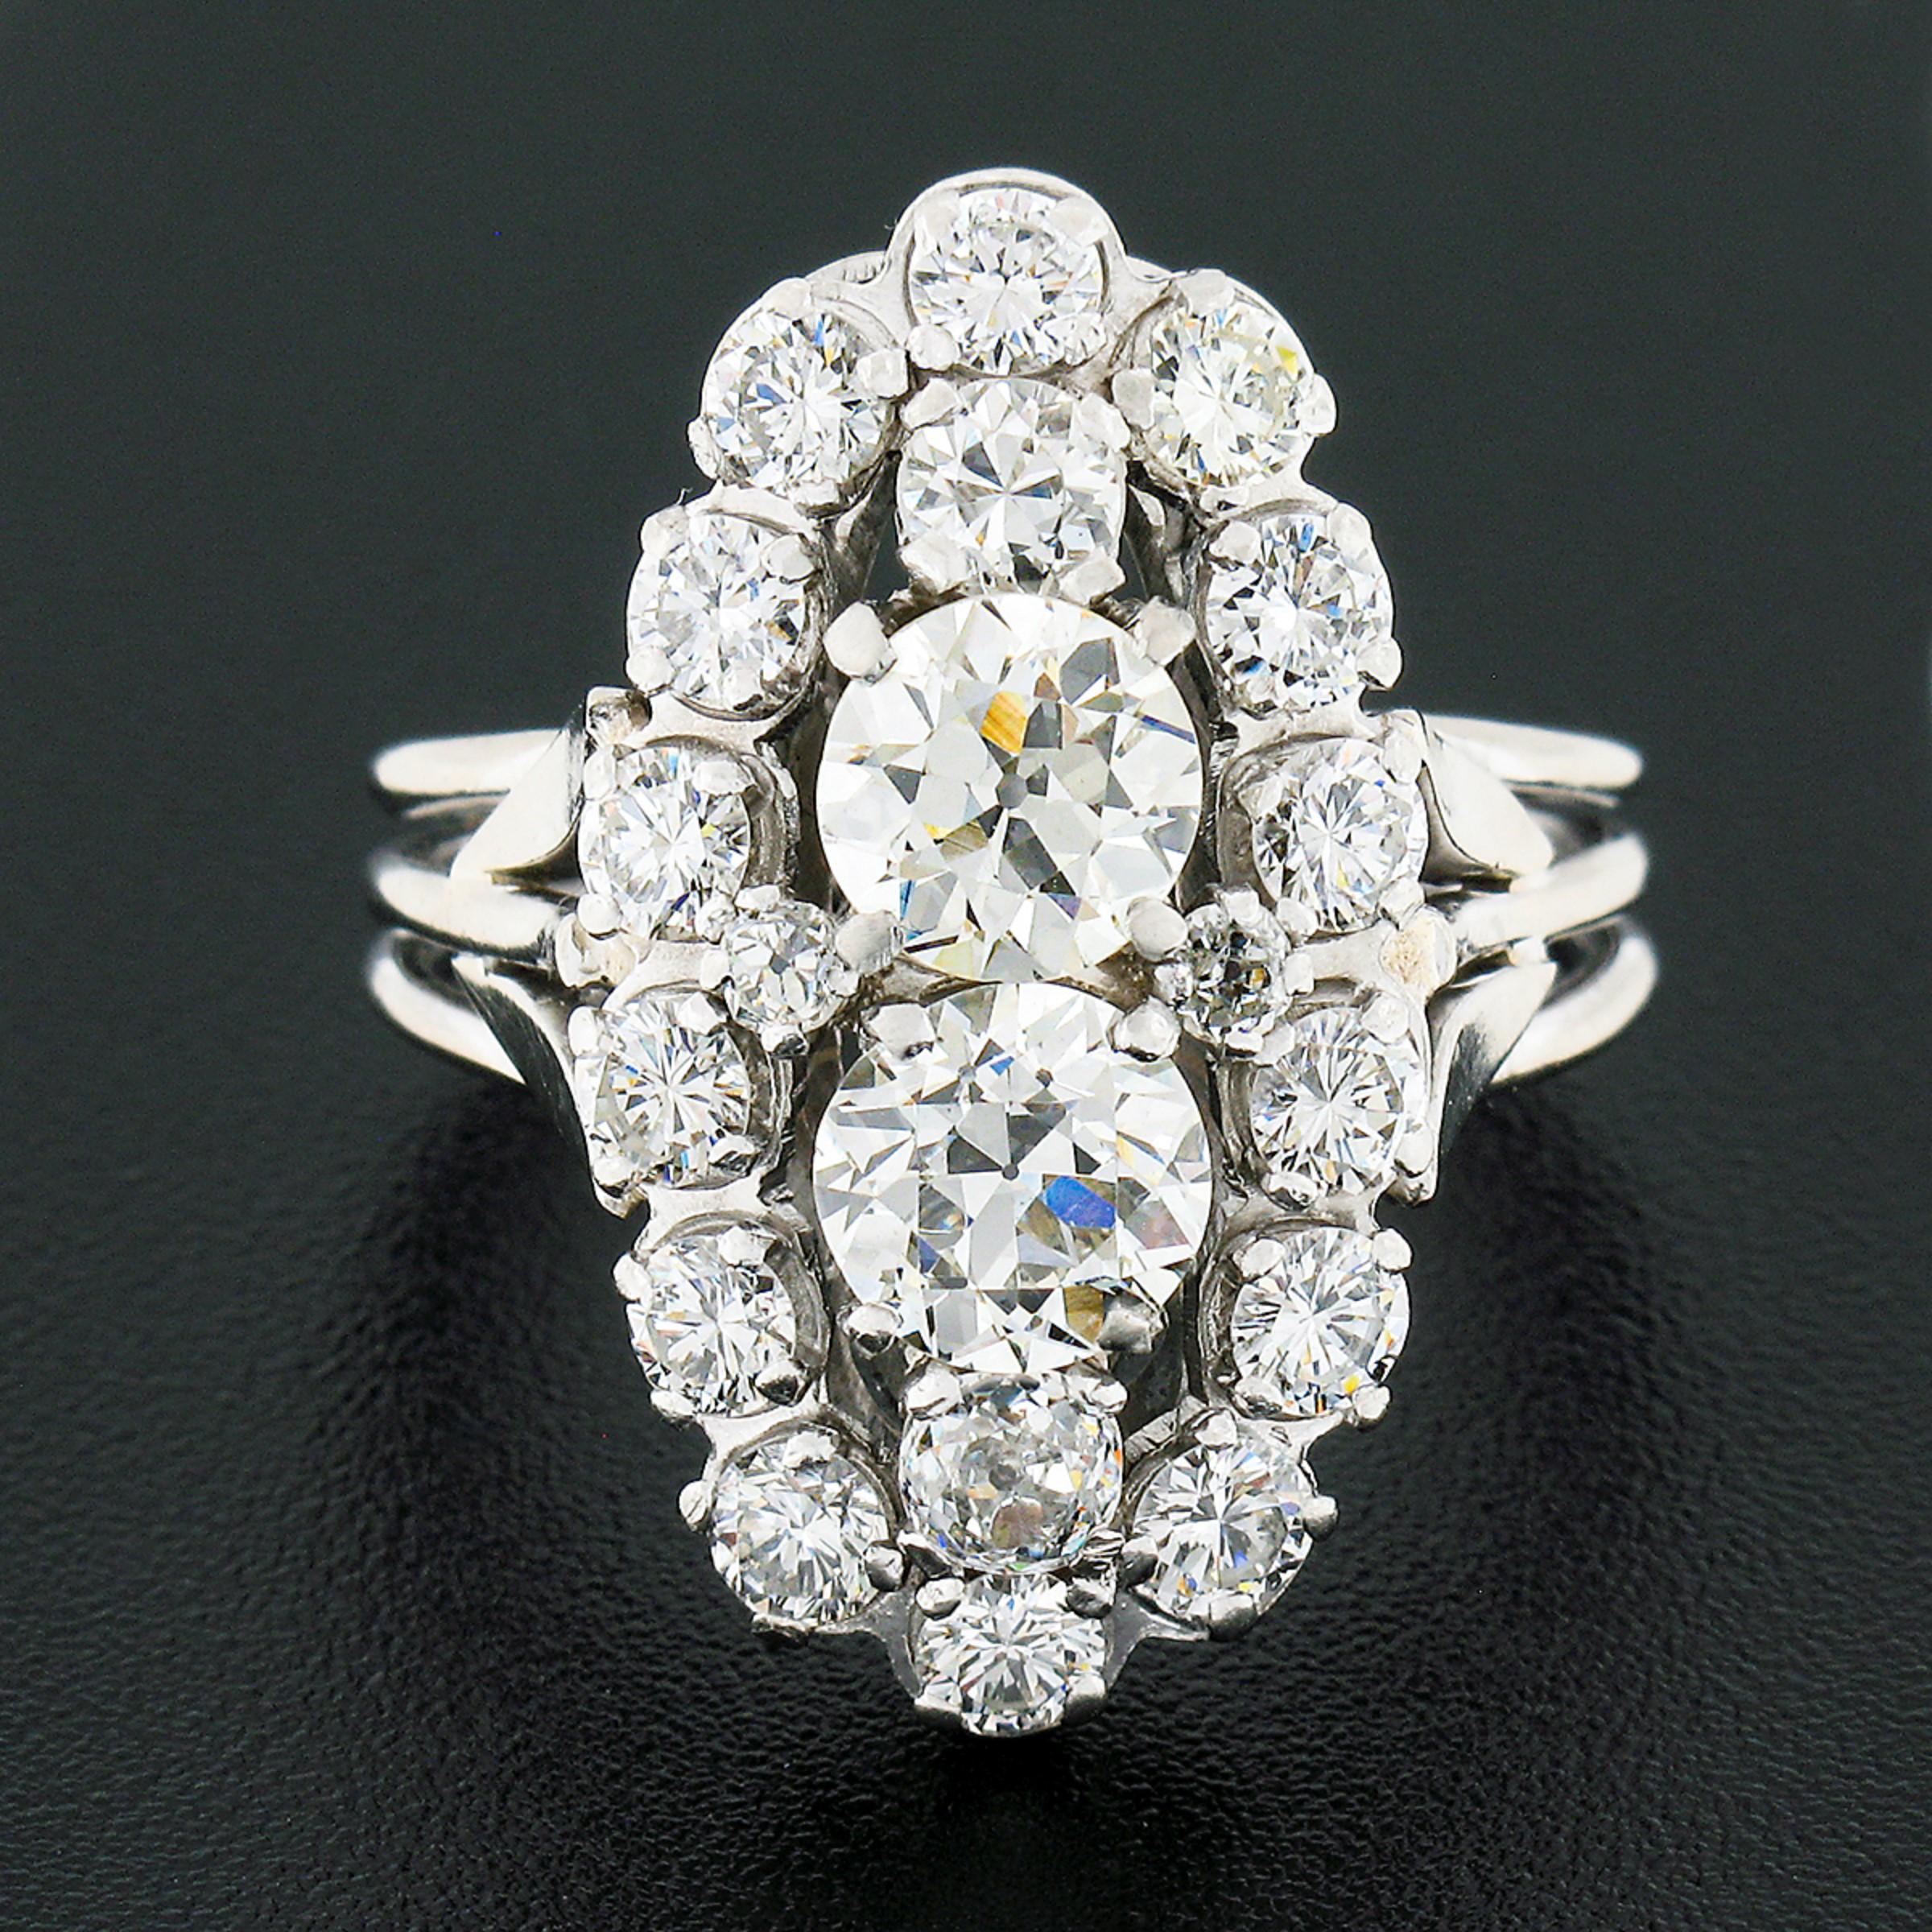 This magnificent vintage dinner ring was crafted from solid 18k white gold and features an elongated oval shaped top drenched with absolutely stunning diamonds throughout. Two old European cut diamonds stand out at the open center with their very